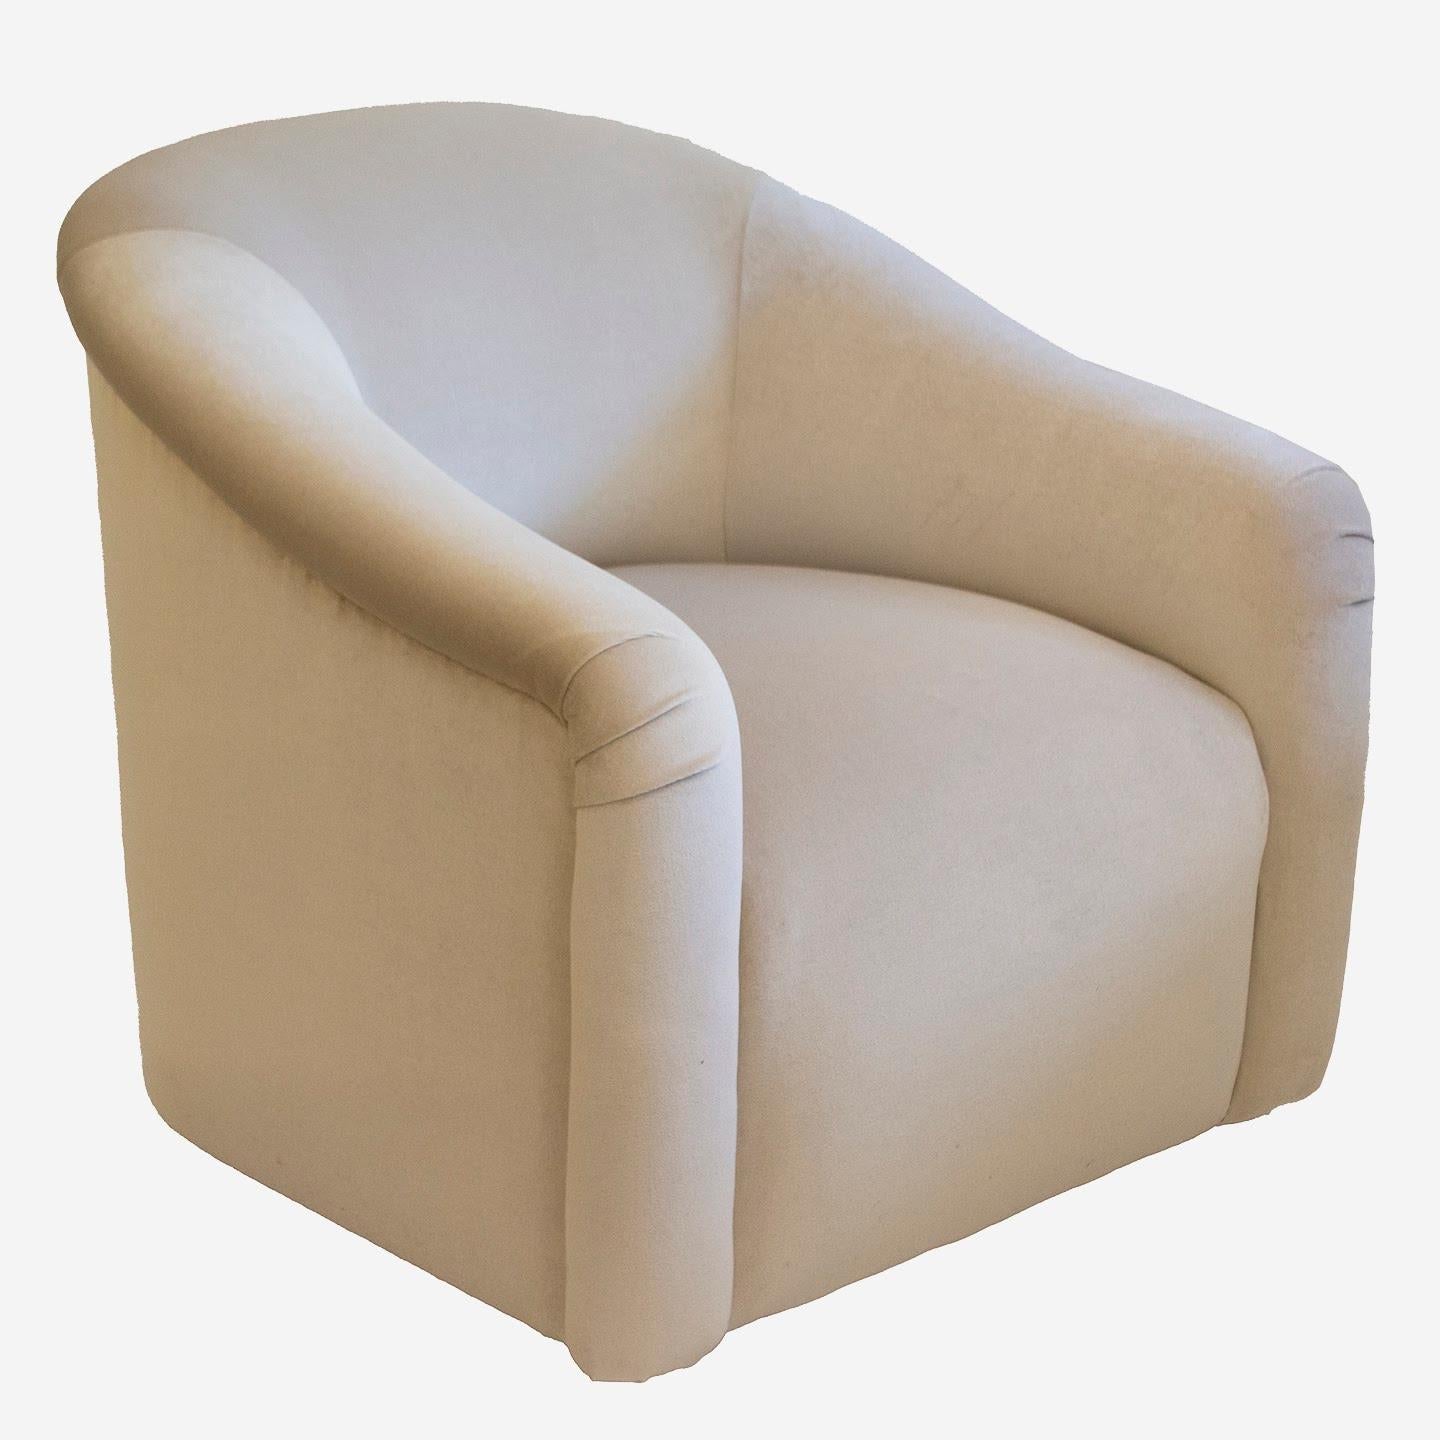 Pair of mid century swivel club chairs in the style of Milo Baughman. They are freshly reupholstered in imported velvet in a lovely cream color. Stunningly elegant, they are suitable for any living space. Generously proportioned with a swivel base,